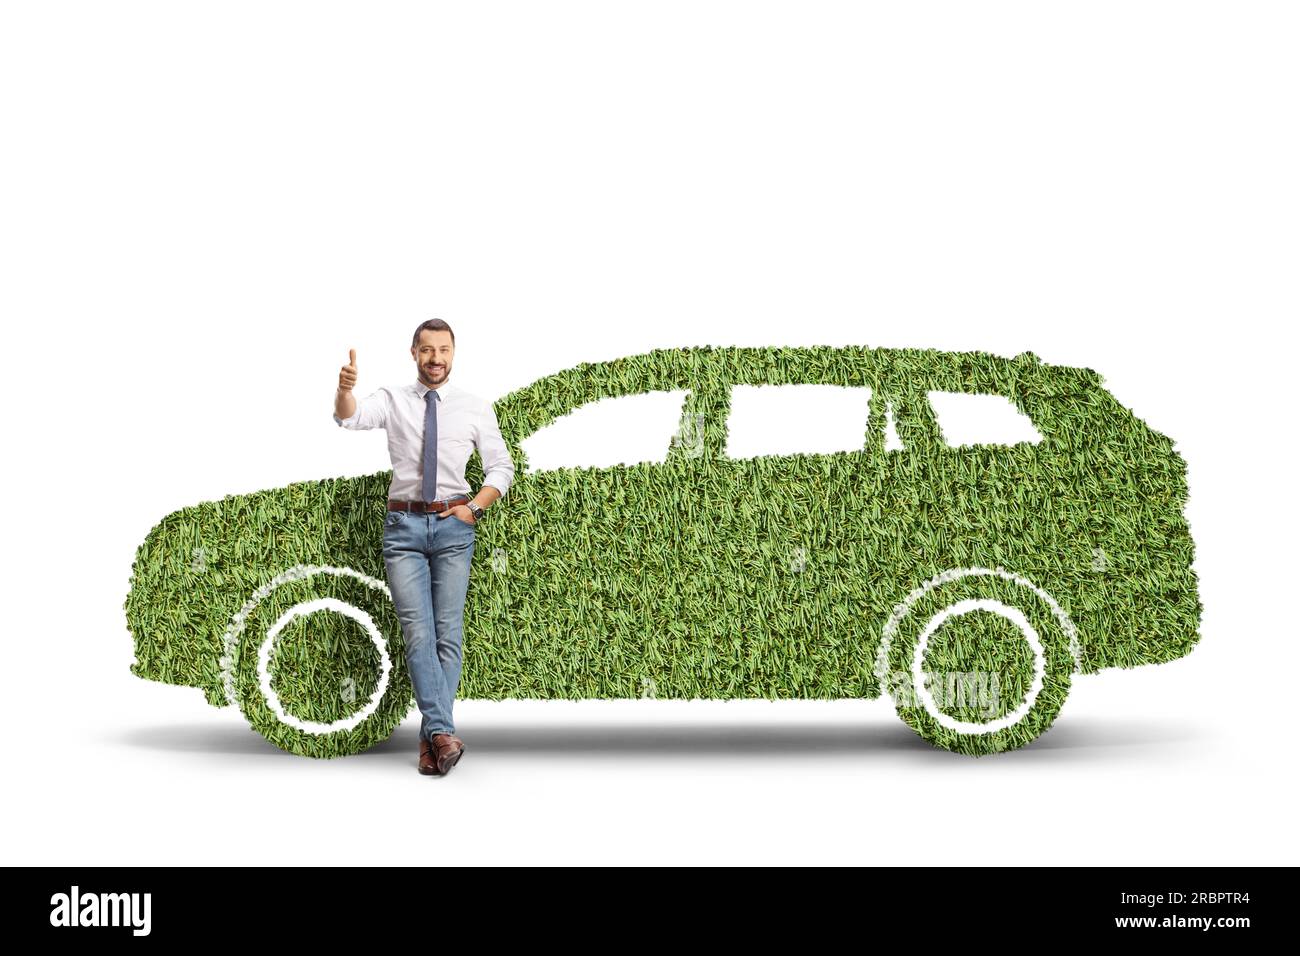 Full length portrait of a man leaning on a green car made of grass and gesturing thumbs up isolated on white background Stock Photo